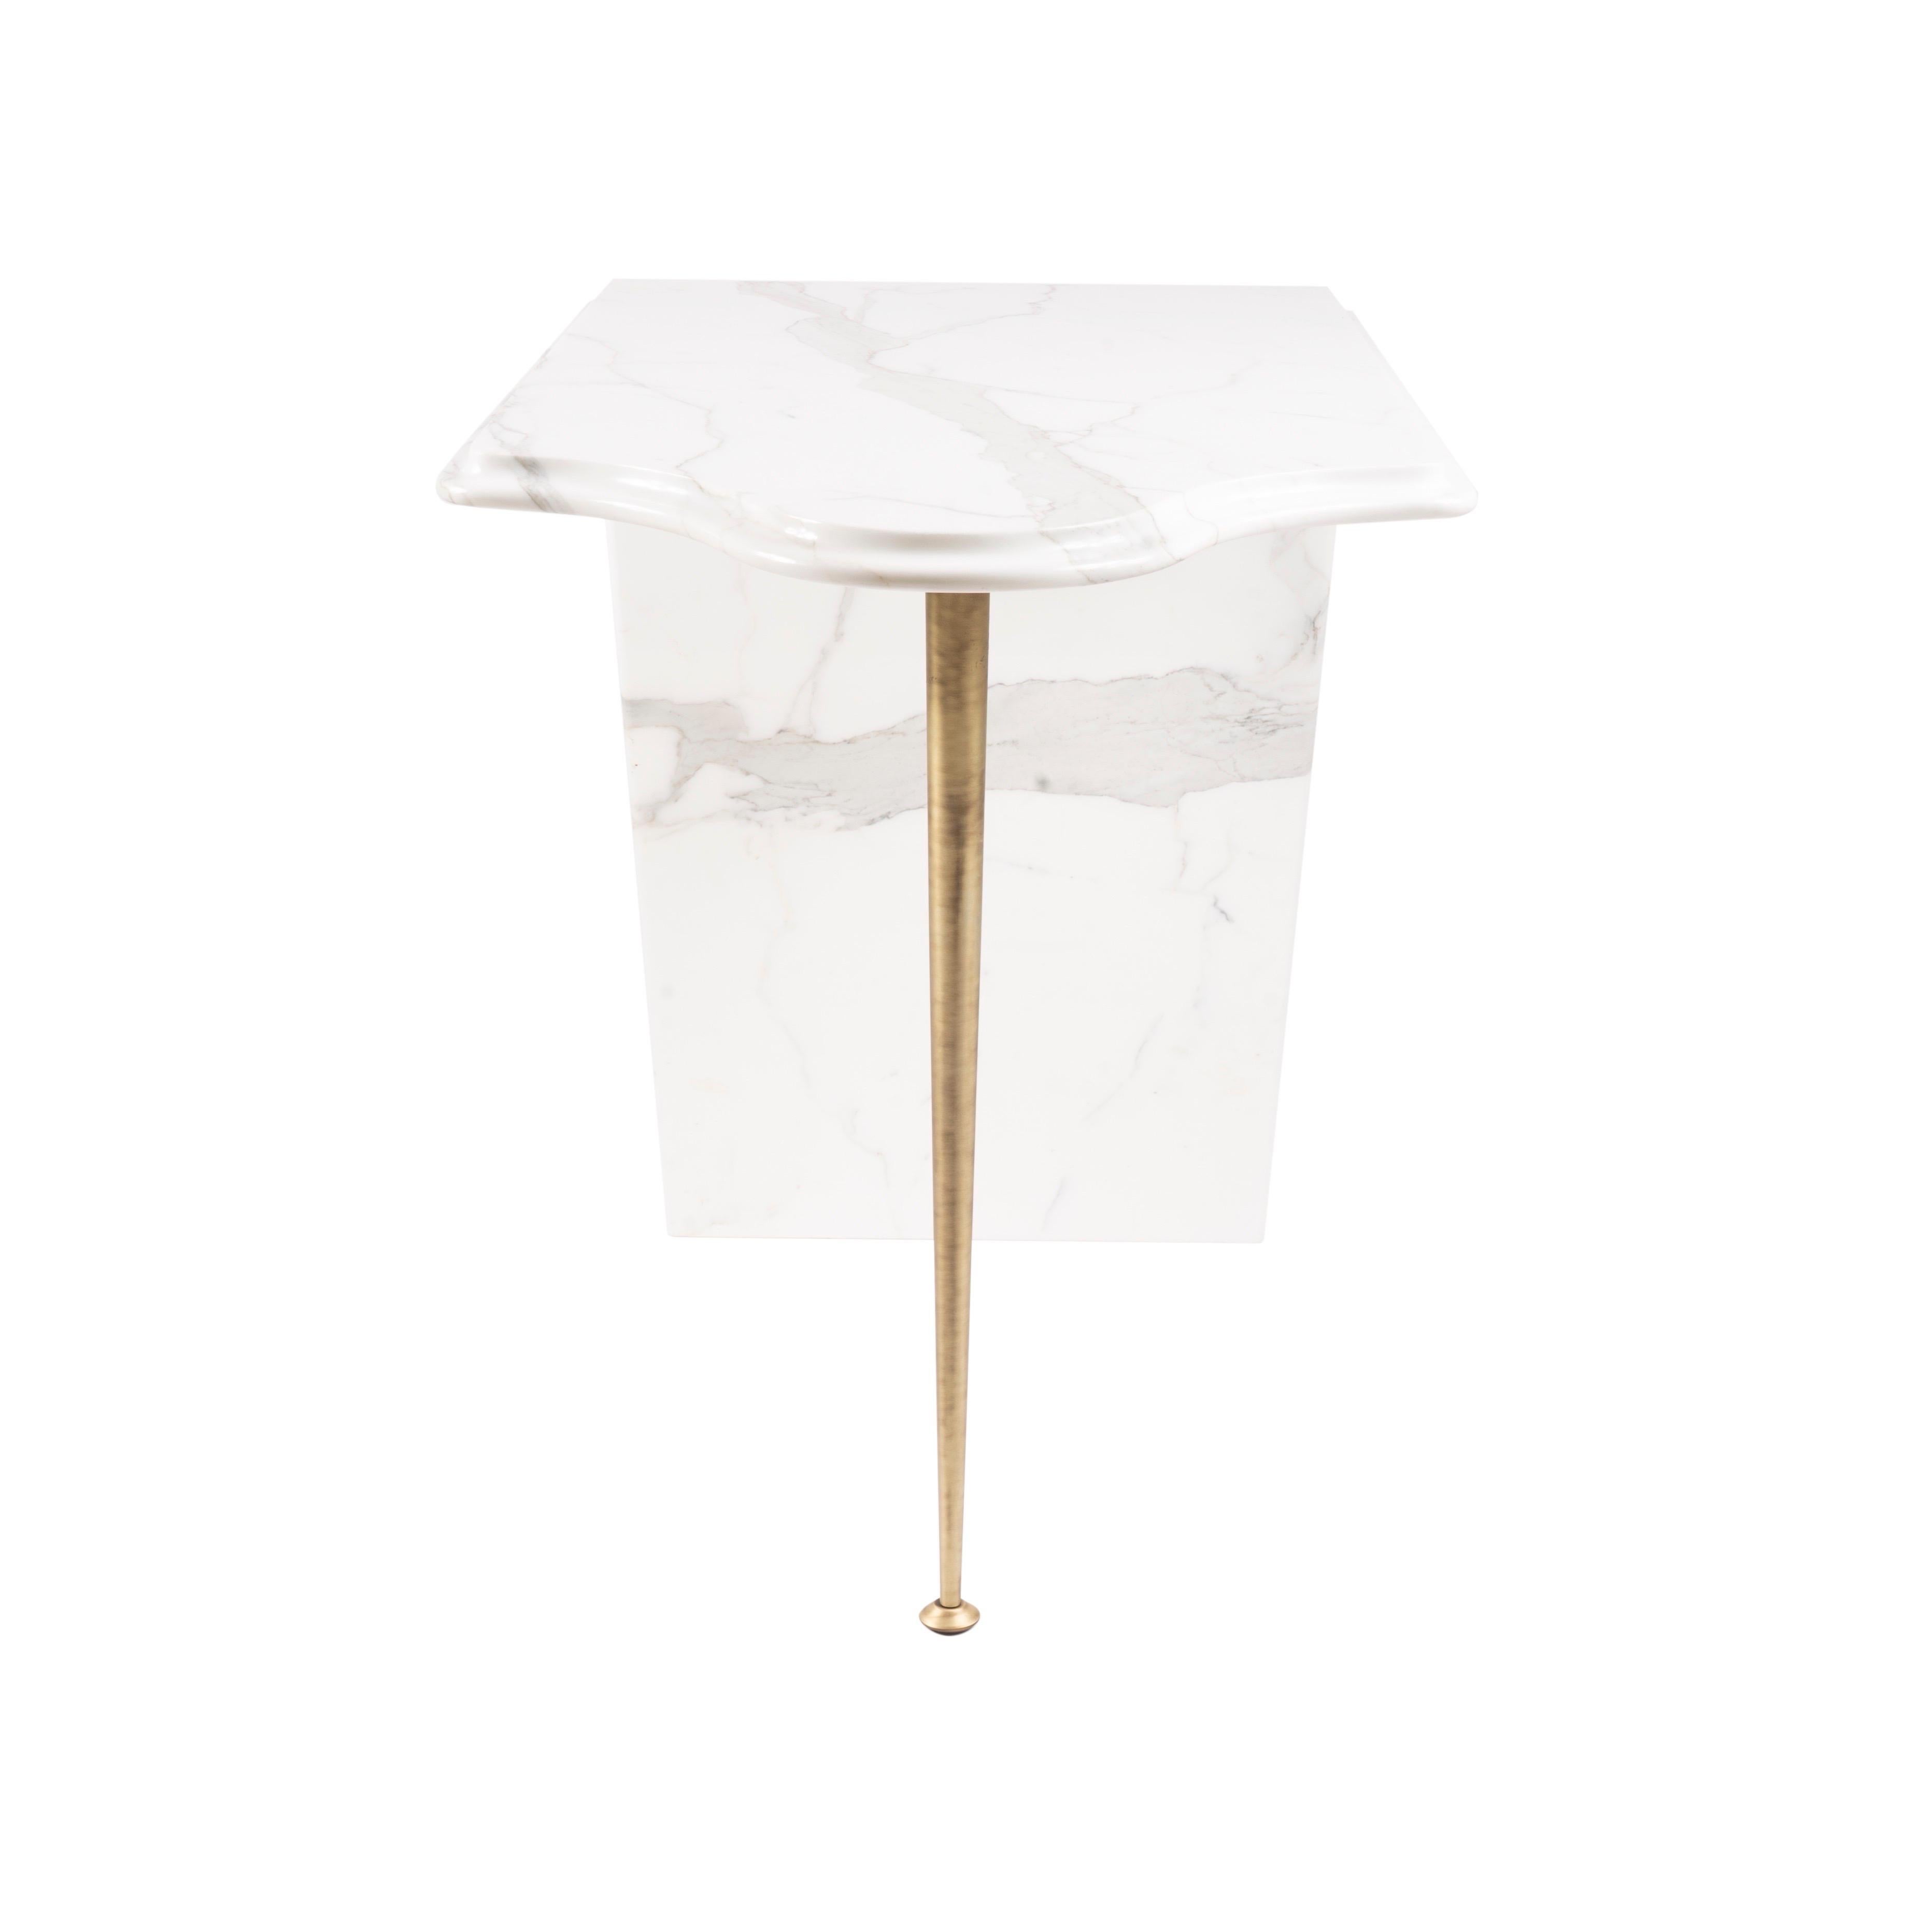 Hand-Carved Raffaele Fusco Console Tables Calacatta Marble 21th Century Modern Tables  For Sale